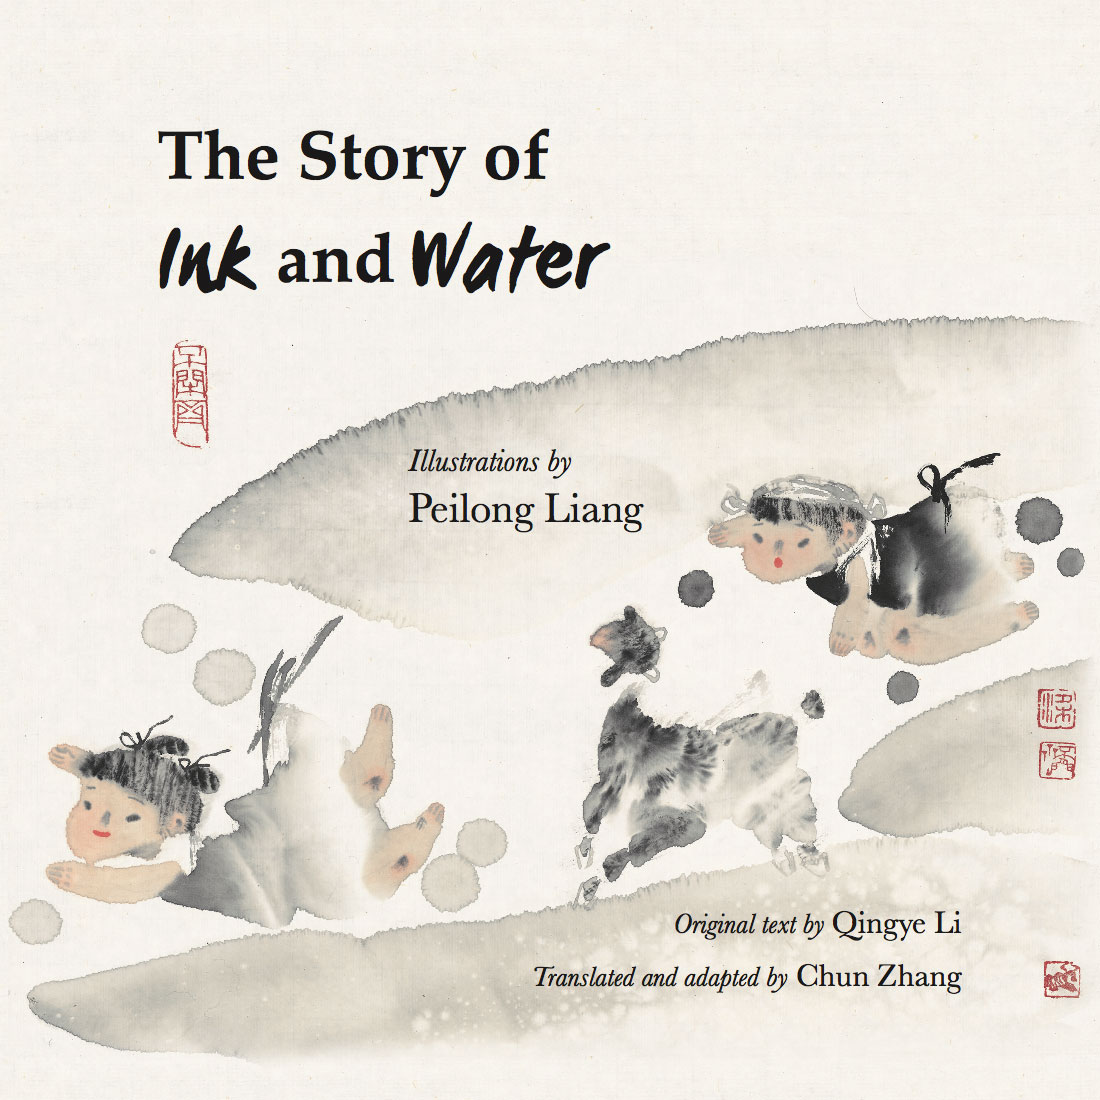 Cover for The Story of Ink and Water featuring a watercolor illustration in black and nude on a cream background suggesting two young children and an animal running by.